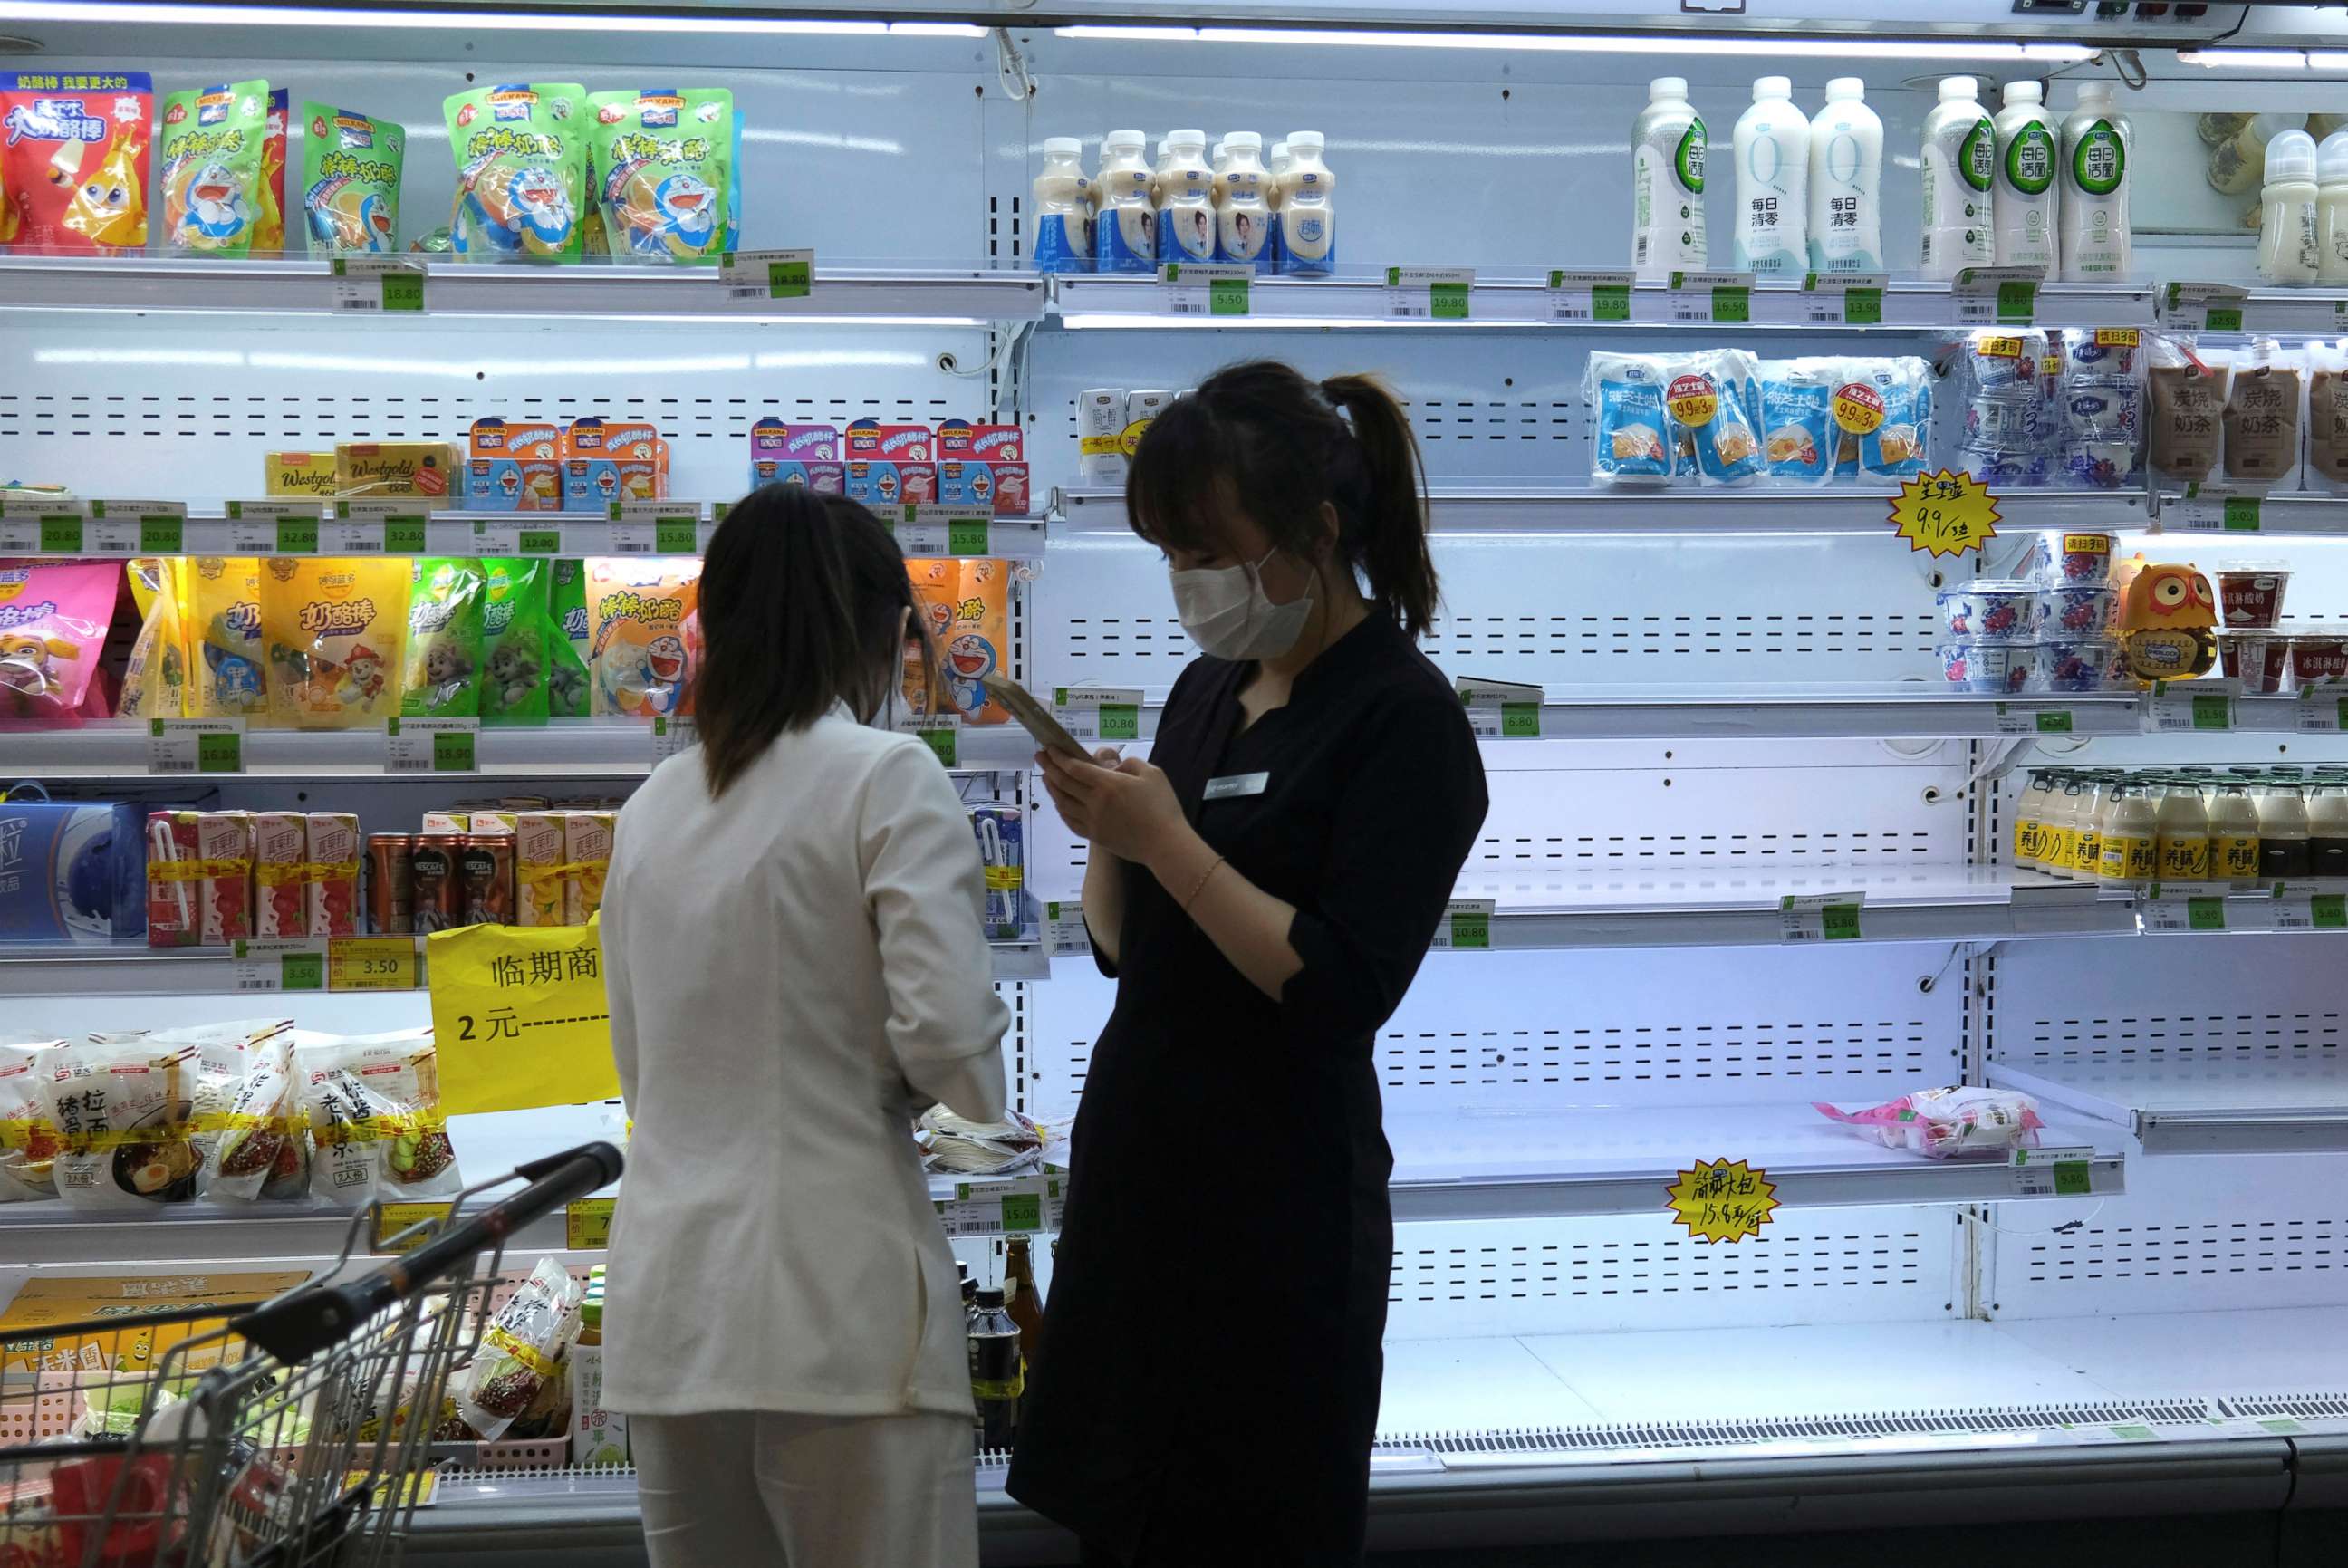 PHOTO: Customers shop in front of a half-empty freezer for diary products, following the COVID-19 outbreak in Beijing, China, April 25, 2022.